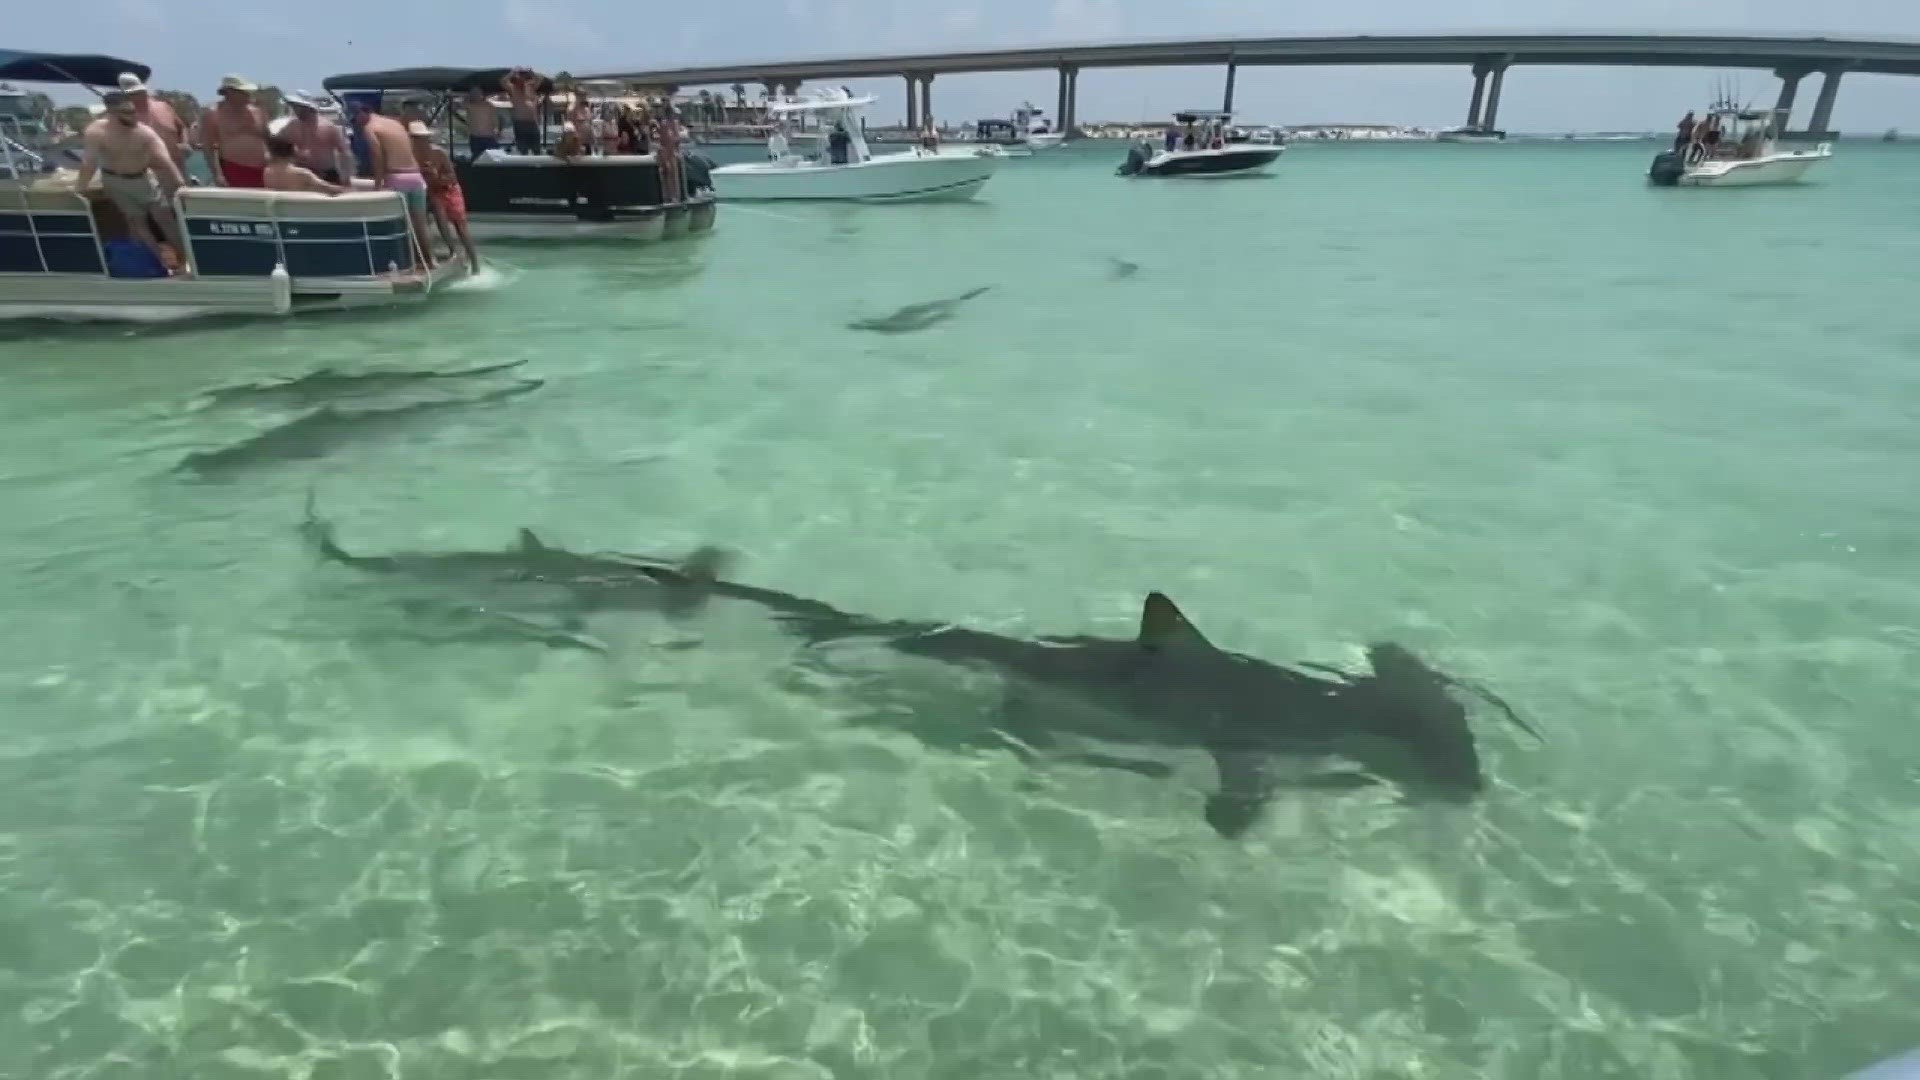 Hammerhead sharks were near boaters and swimmers in Orange Beach, while a bear - yes, a bear - was spotted on the beach in Destin.